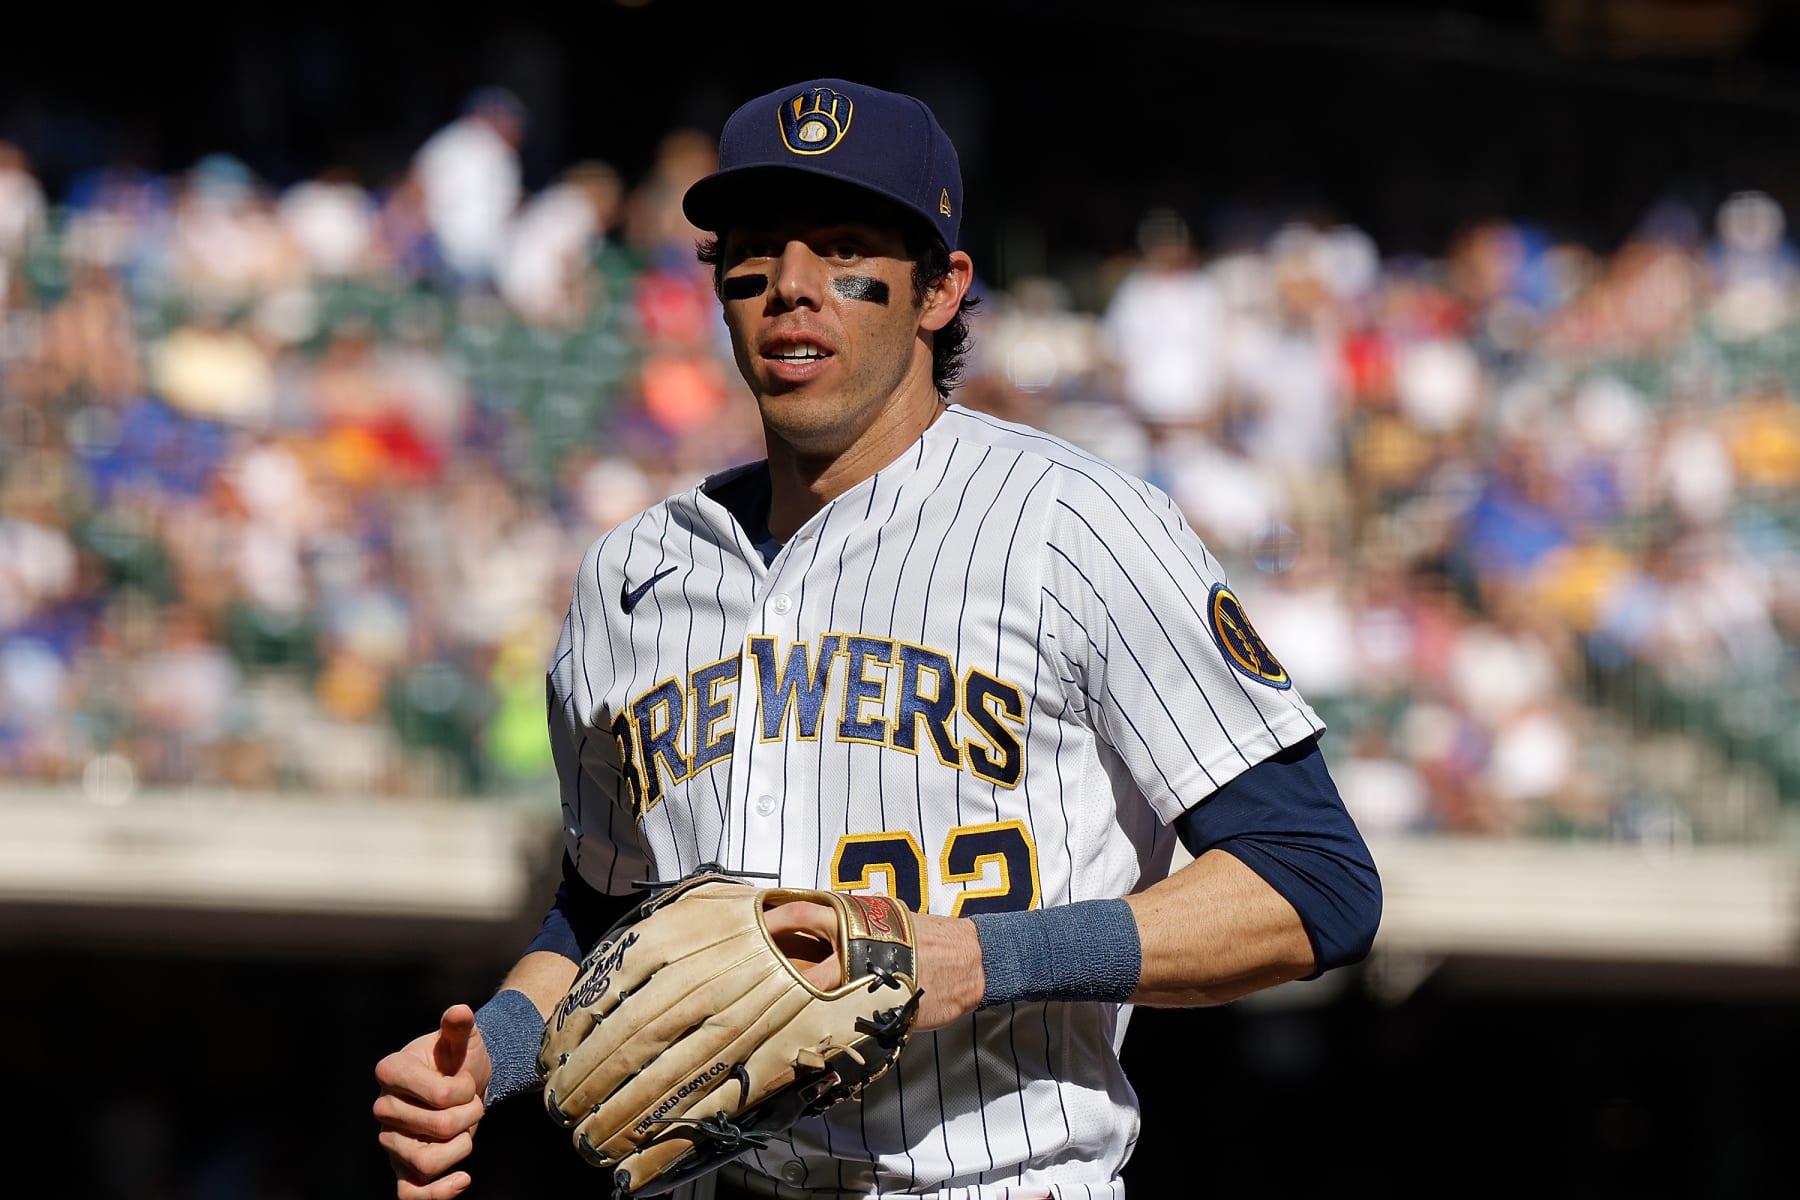 Milb Central on X: The Oakland Athletics have signed Drew